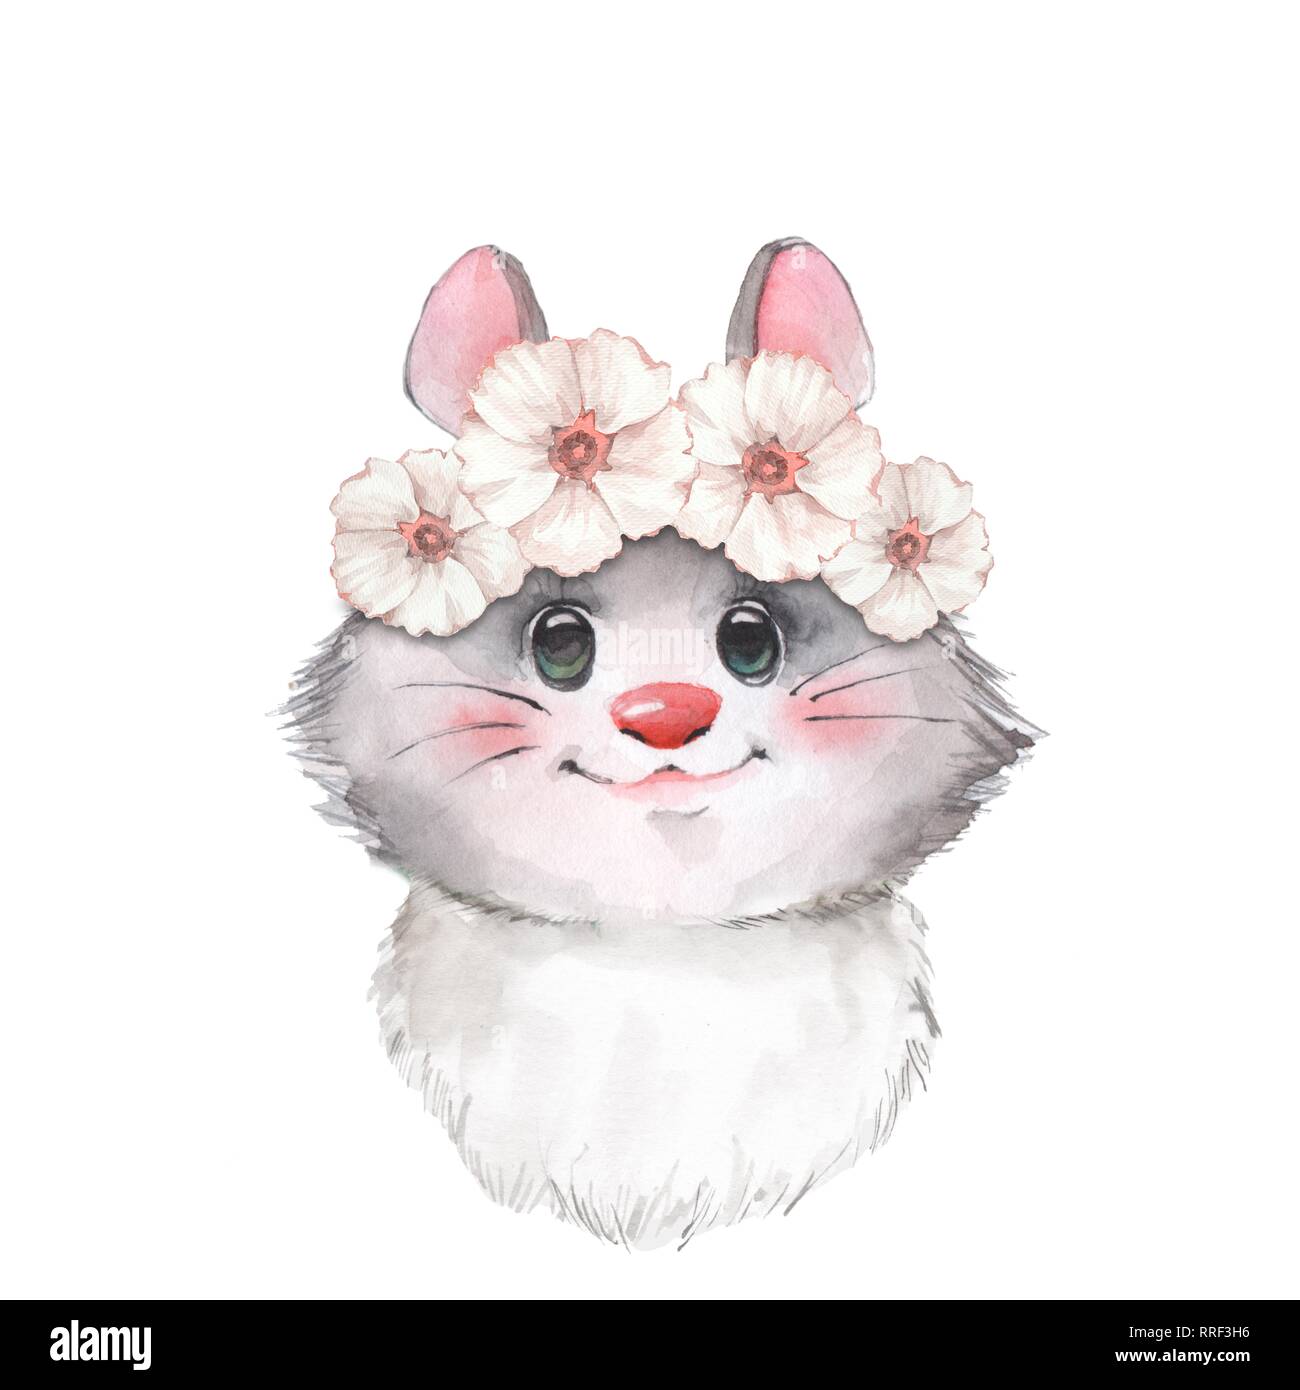 Cute mouse, watercolor Stock Photo